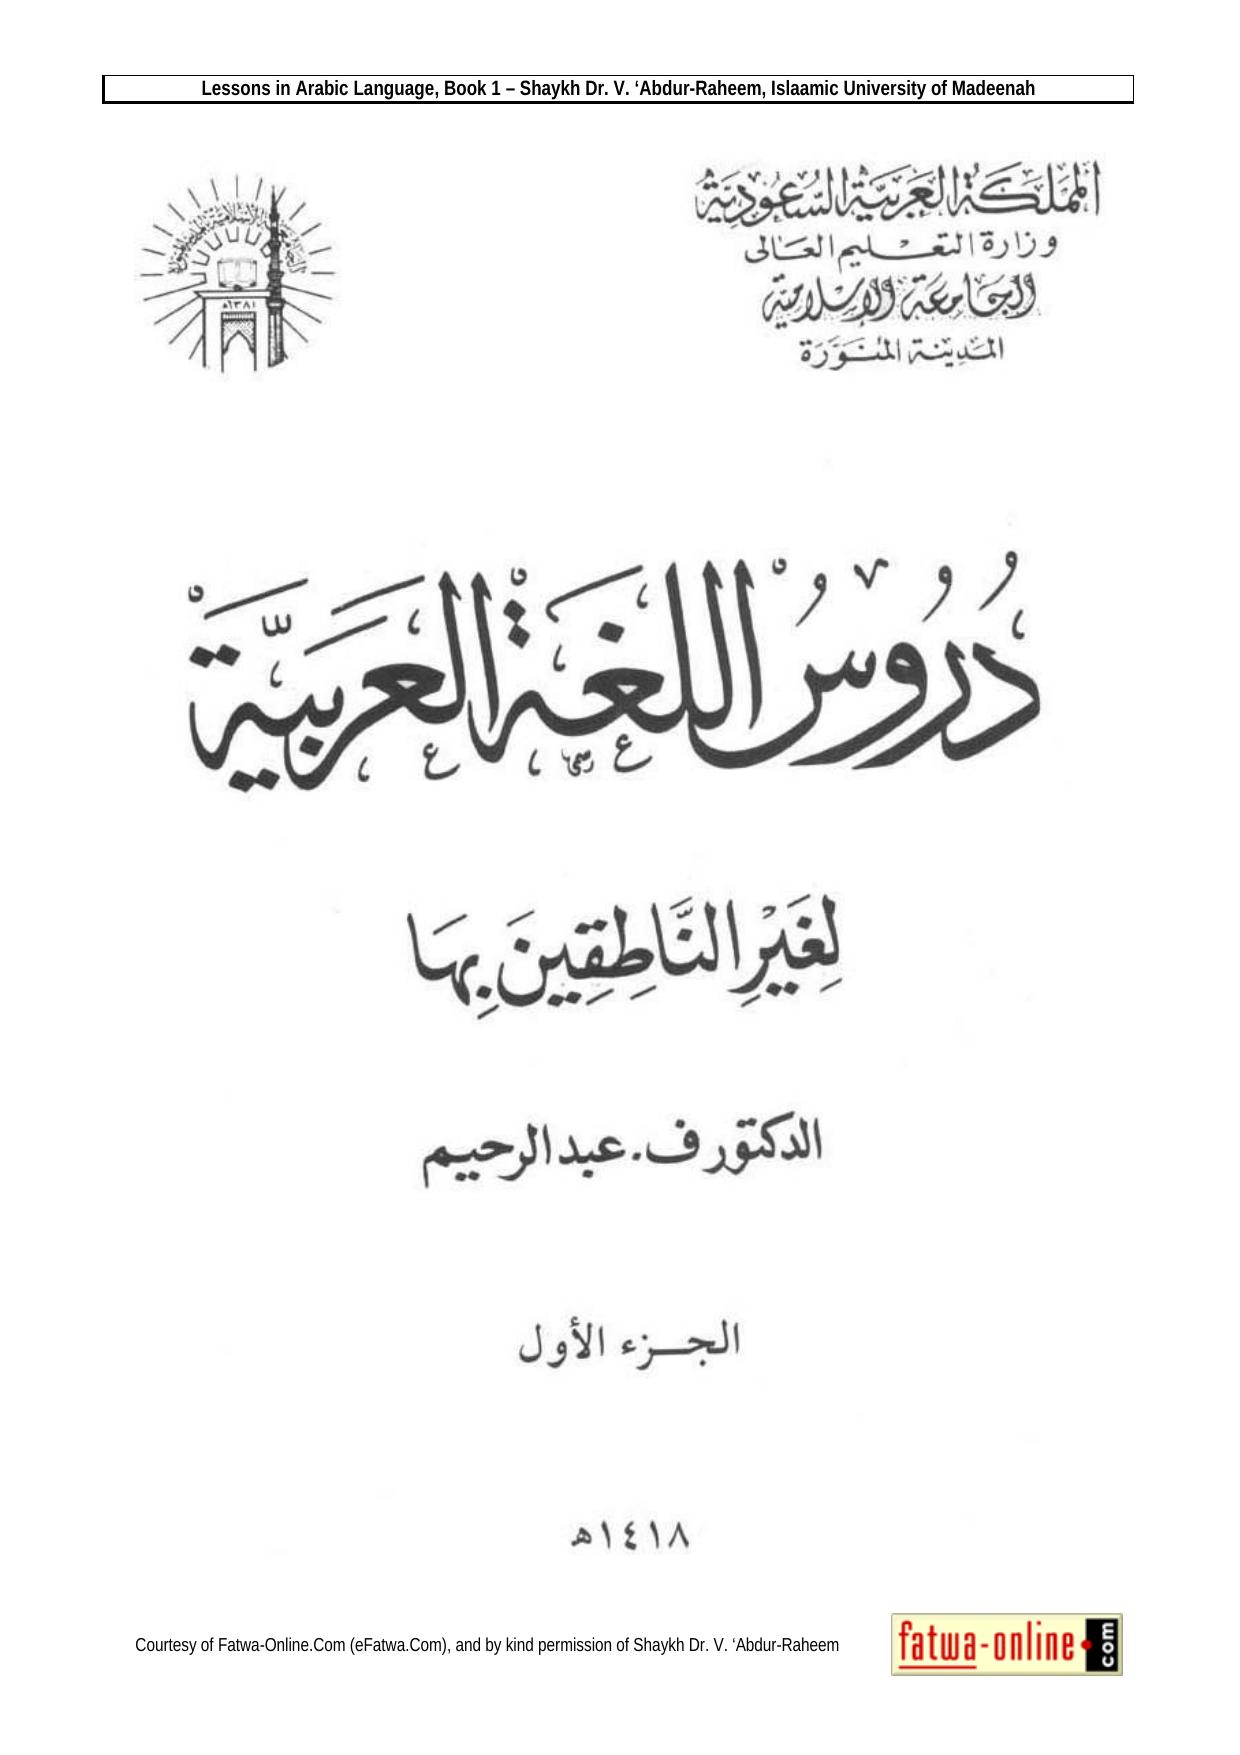 Lessons in Arabic Language, Book 1